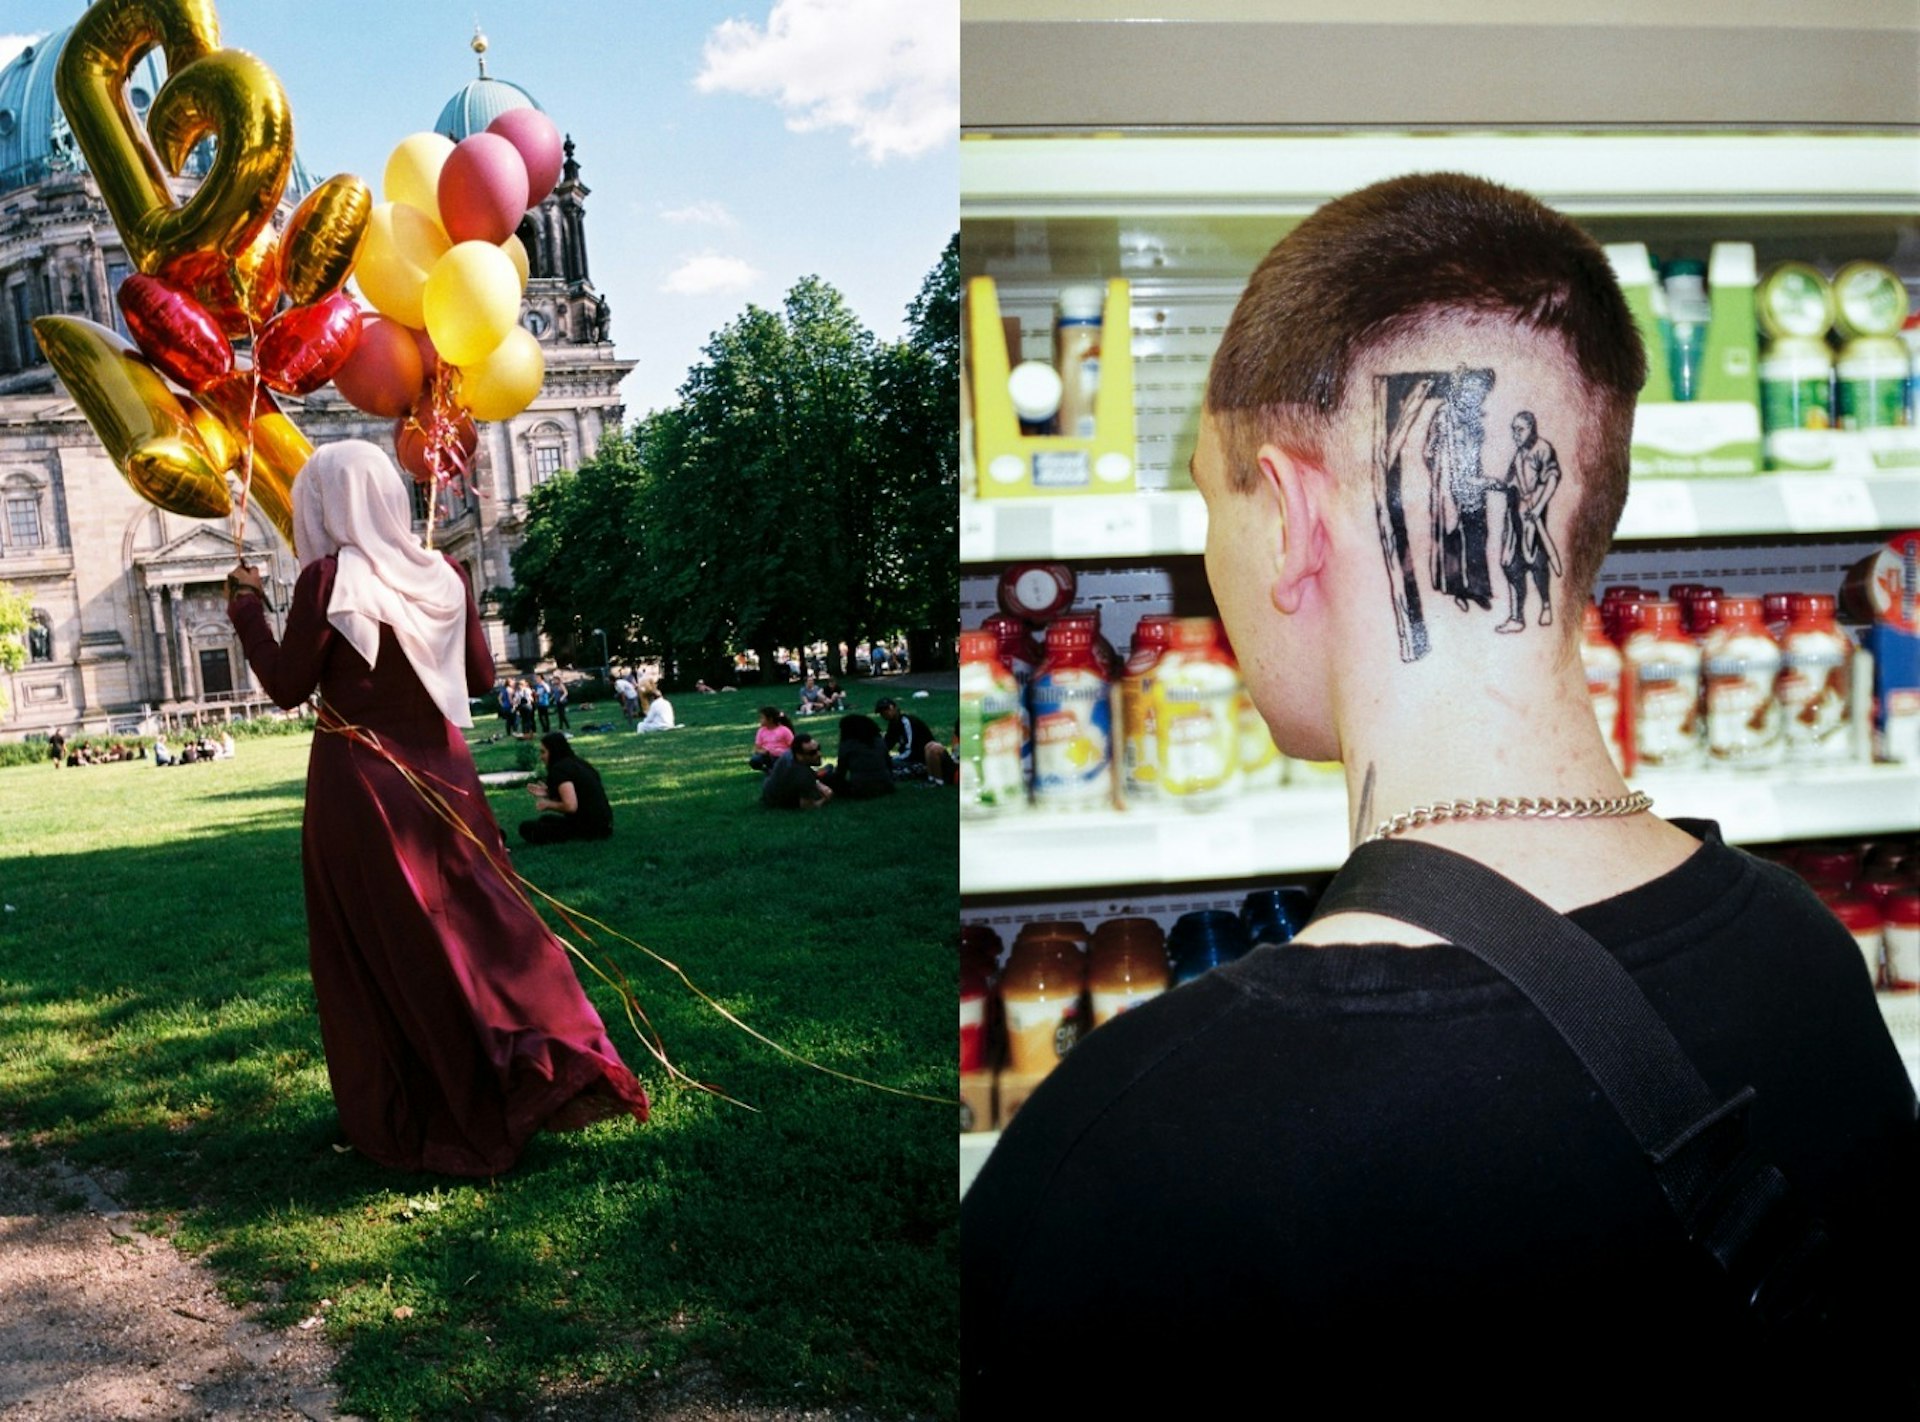 The everyday idiosyncrasies of Berlin’s streets